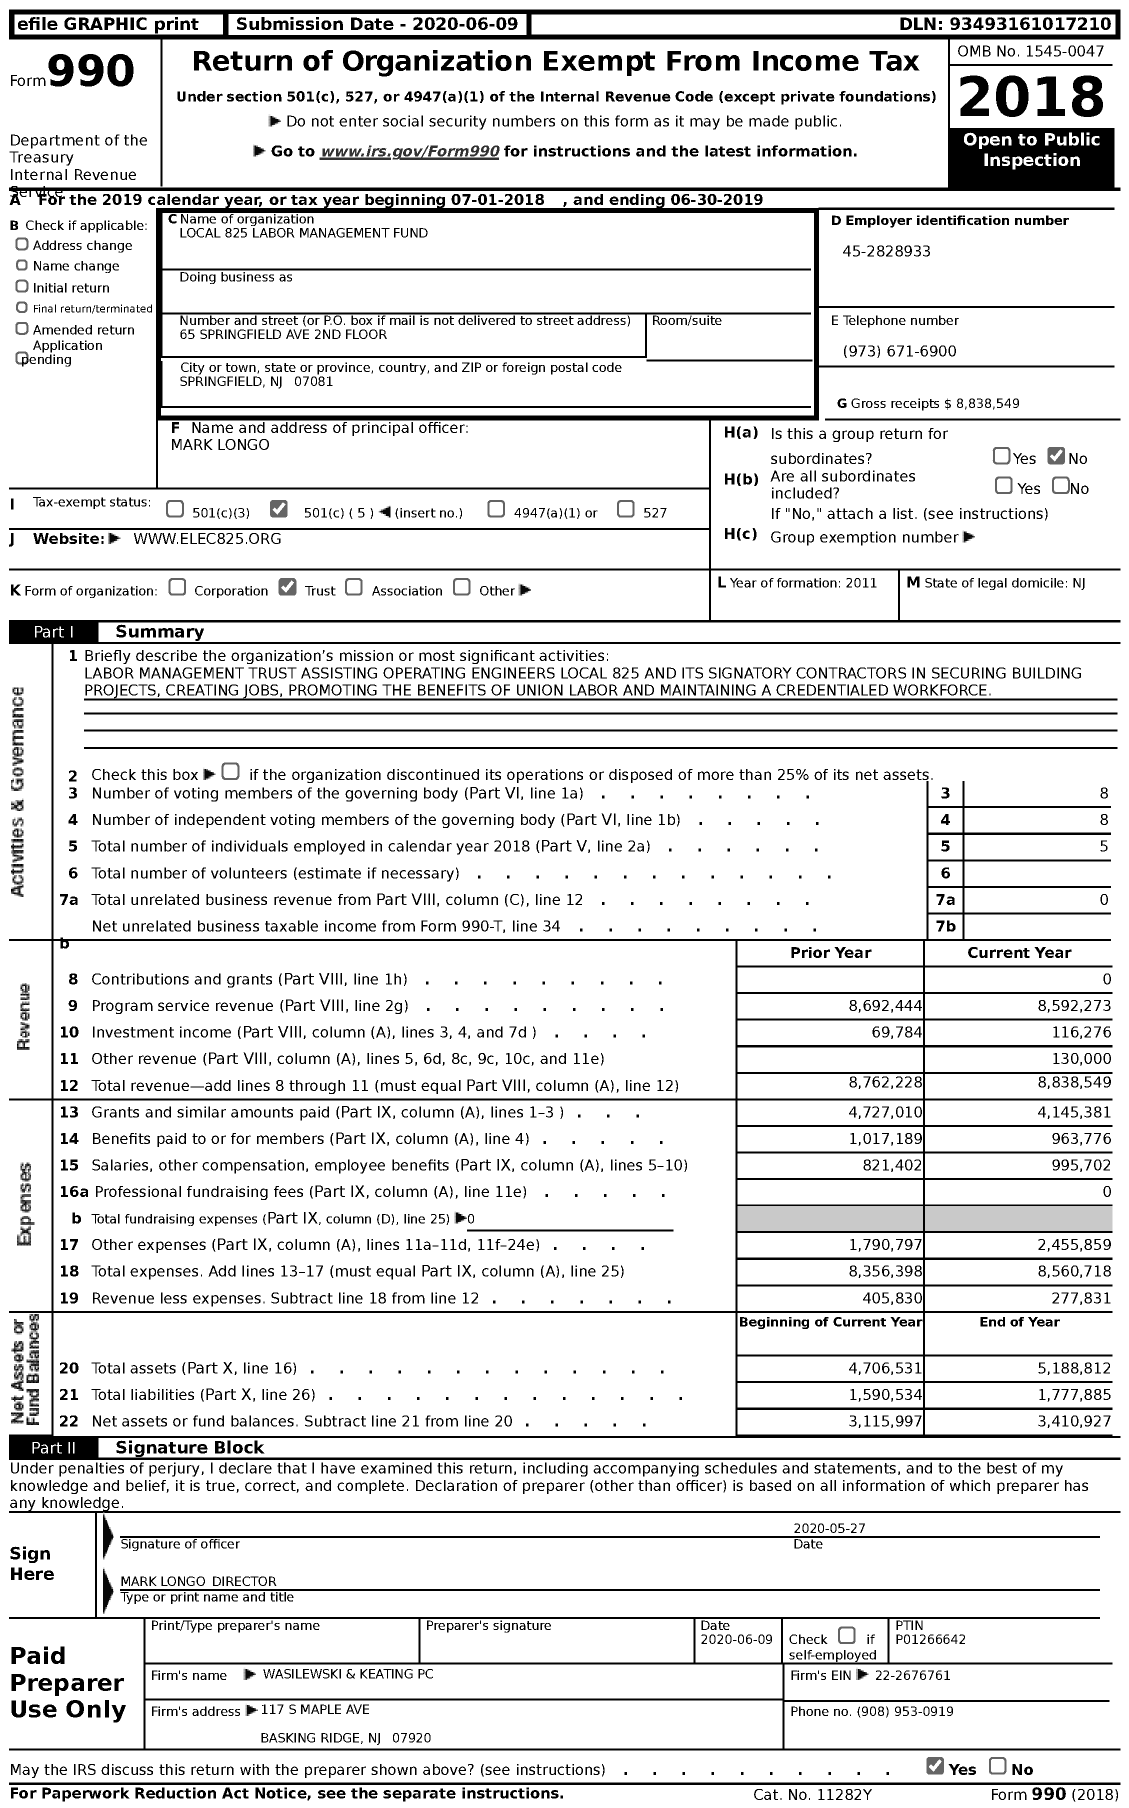 Image of first page of 2018 Form 990 for Local 825 Labor Management Fund (ELEC 825)